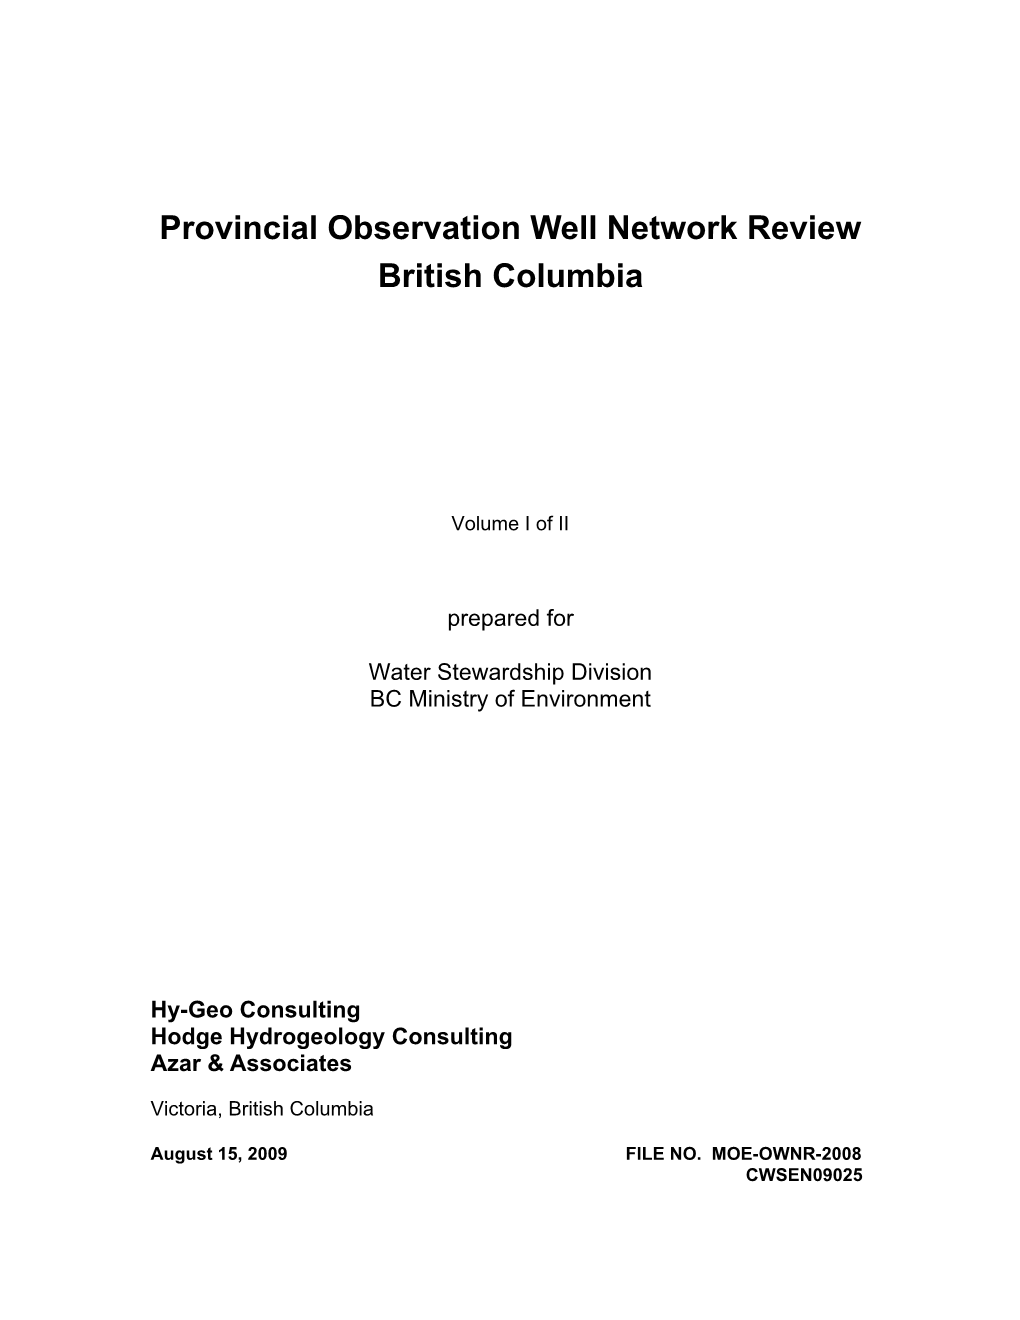 Provincial Observation Well Network Review British Columbia